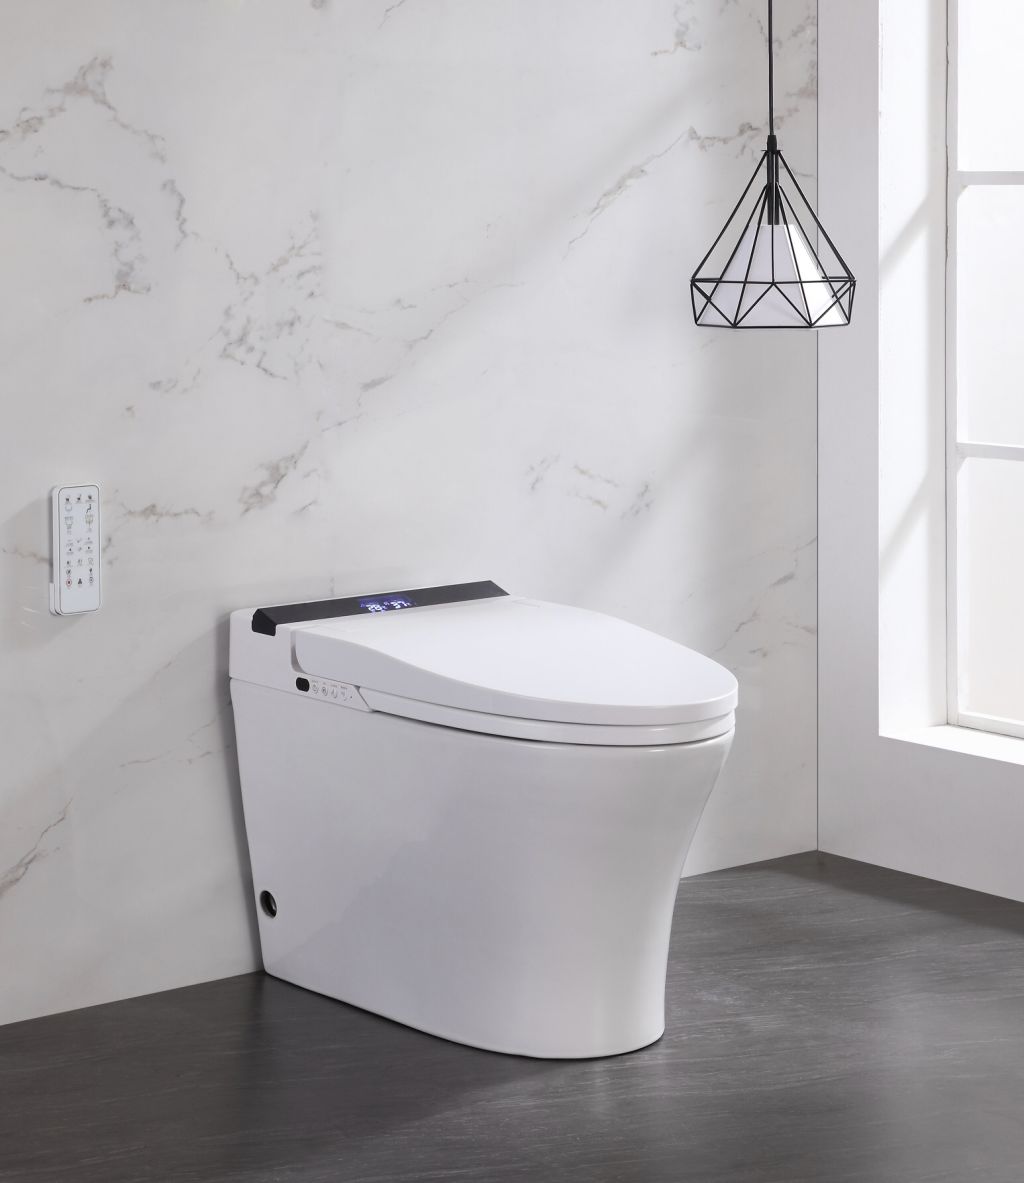 Their sleek look will make them look right at home in a modern bathroom. Photo: Smart Toilet Australia.